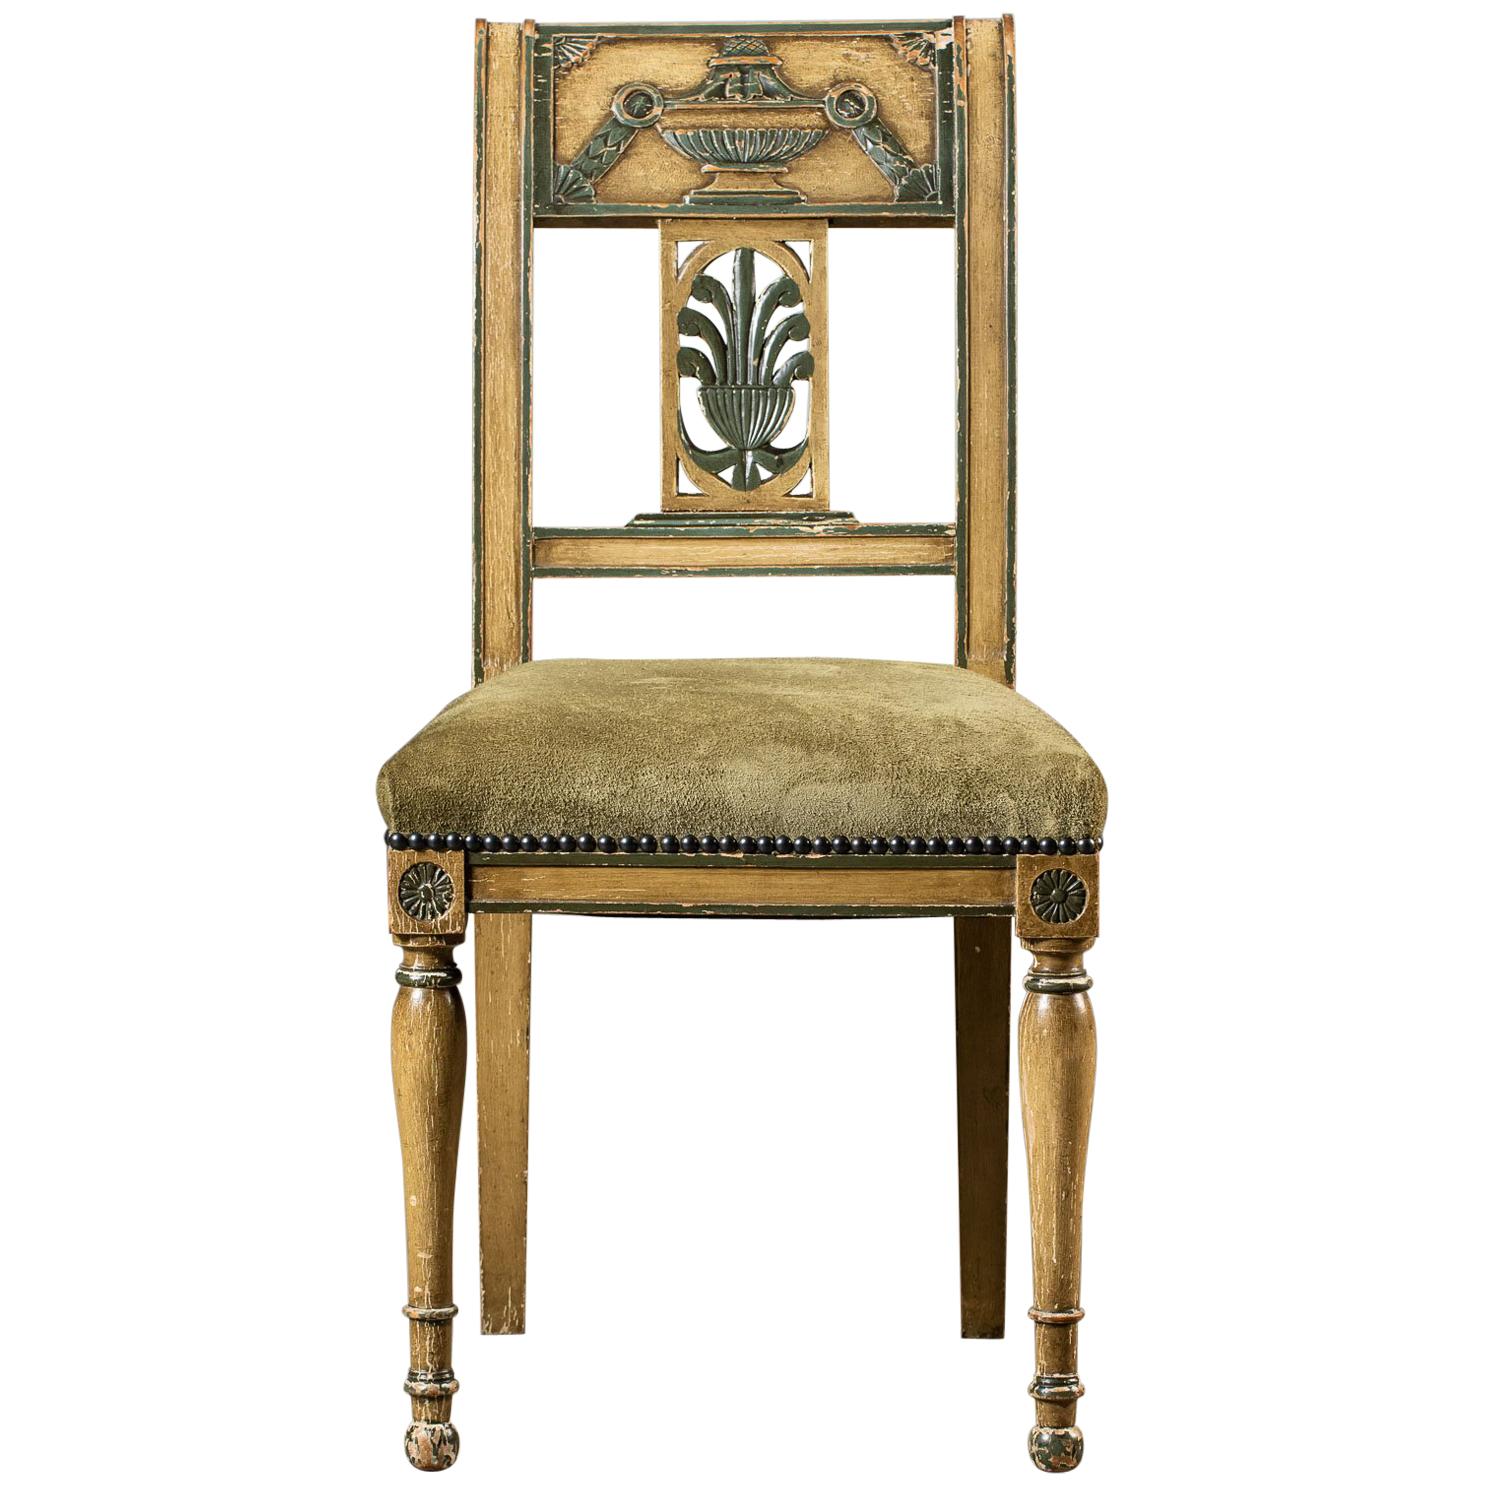 Directoire Empire Style Antique French Painted Chair, circa 1850